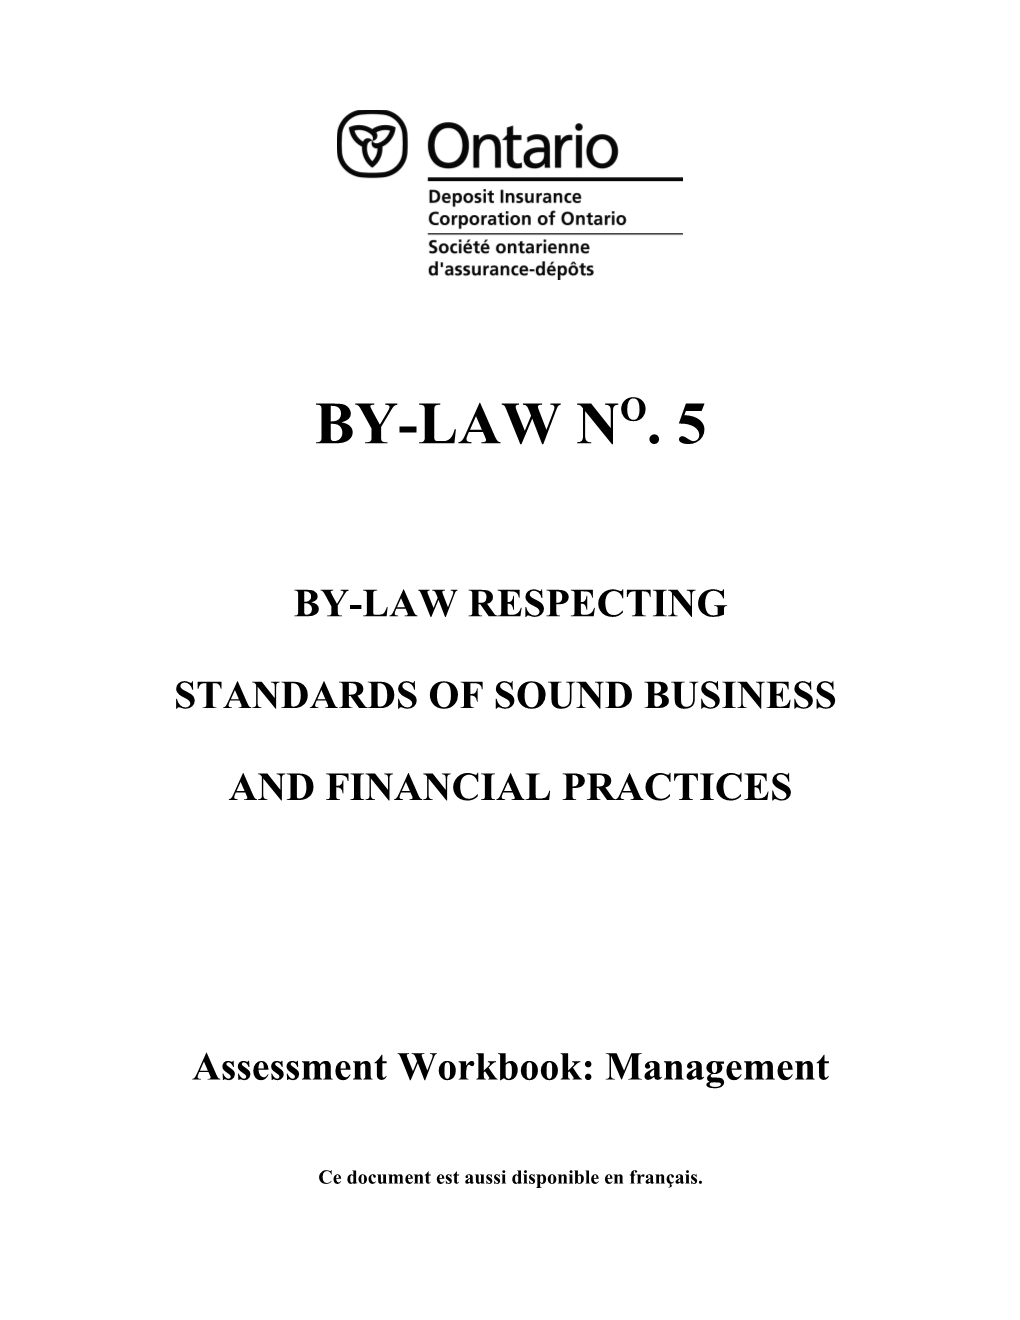 Standards of Sound Business and Financial Parctices